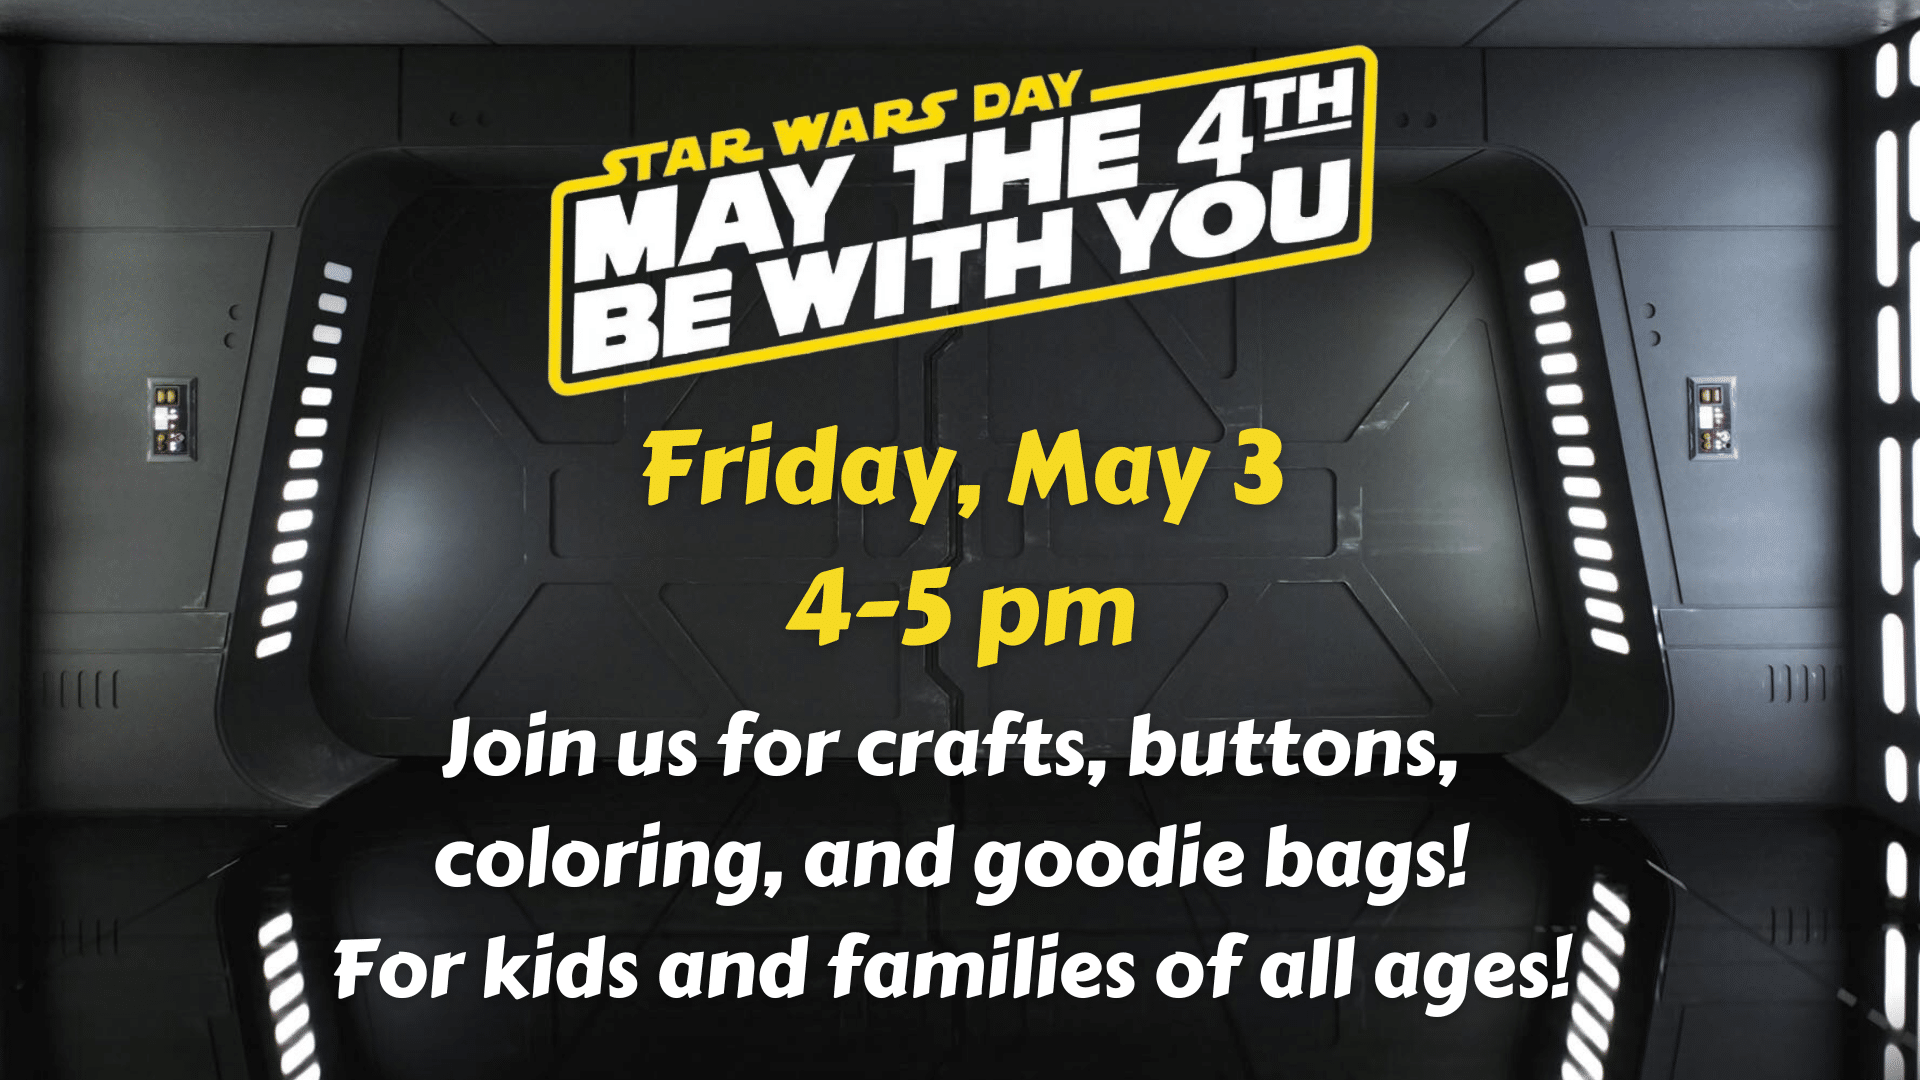 May the 4th Be with You! Friday, May 3, 4-5 pm. For kids and families